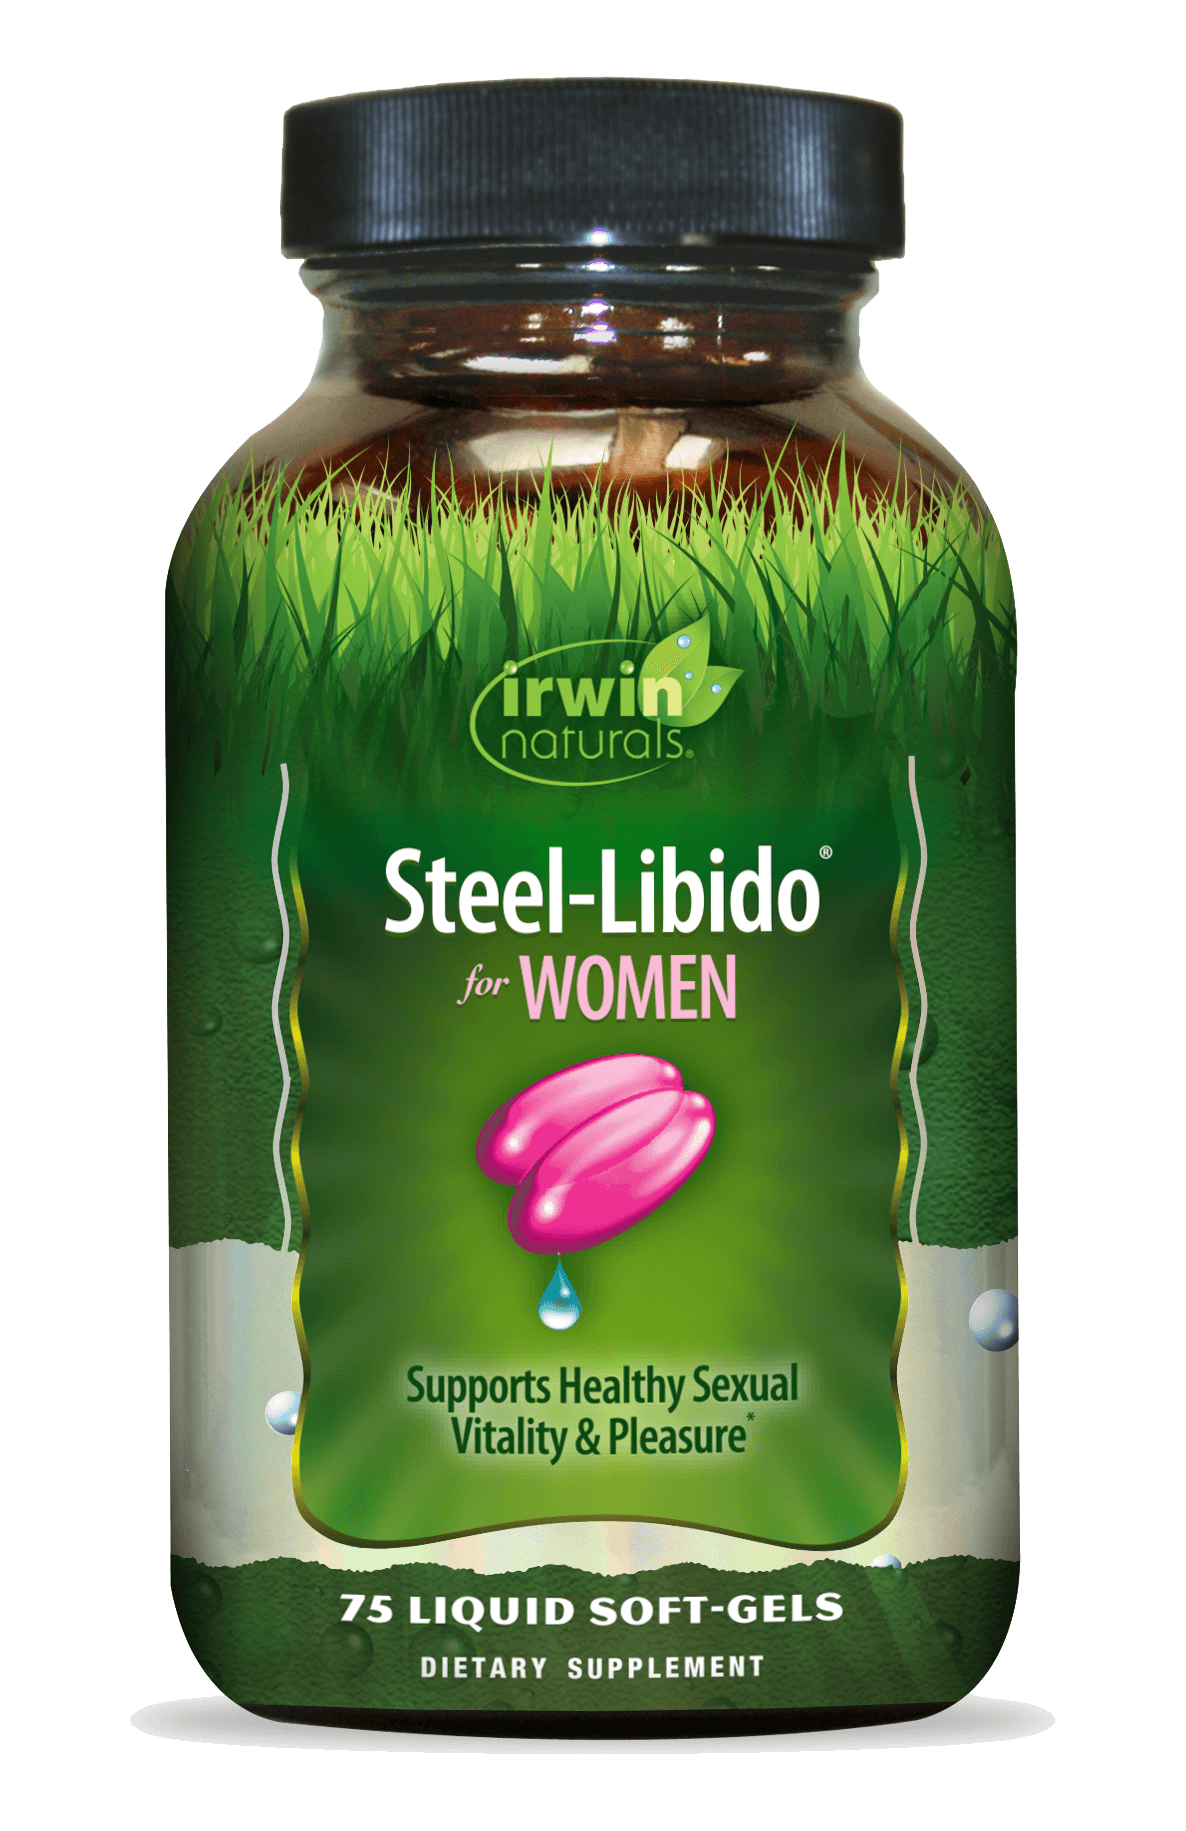 Steel Libido for Women Supports Healthy Sexual Vitality and Pleasure by Irwin Naturals